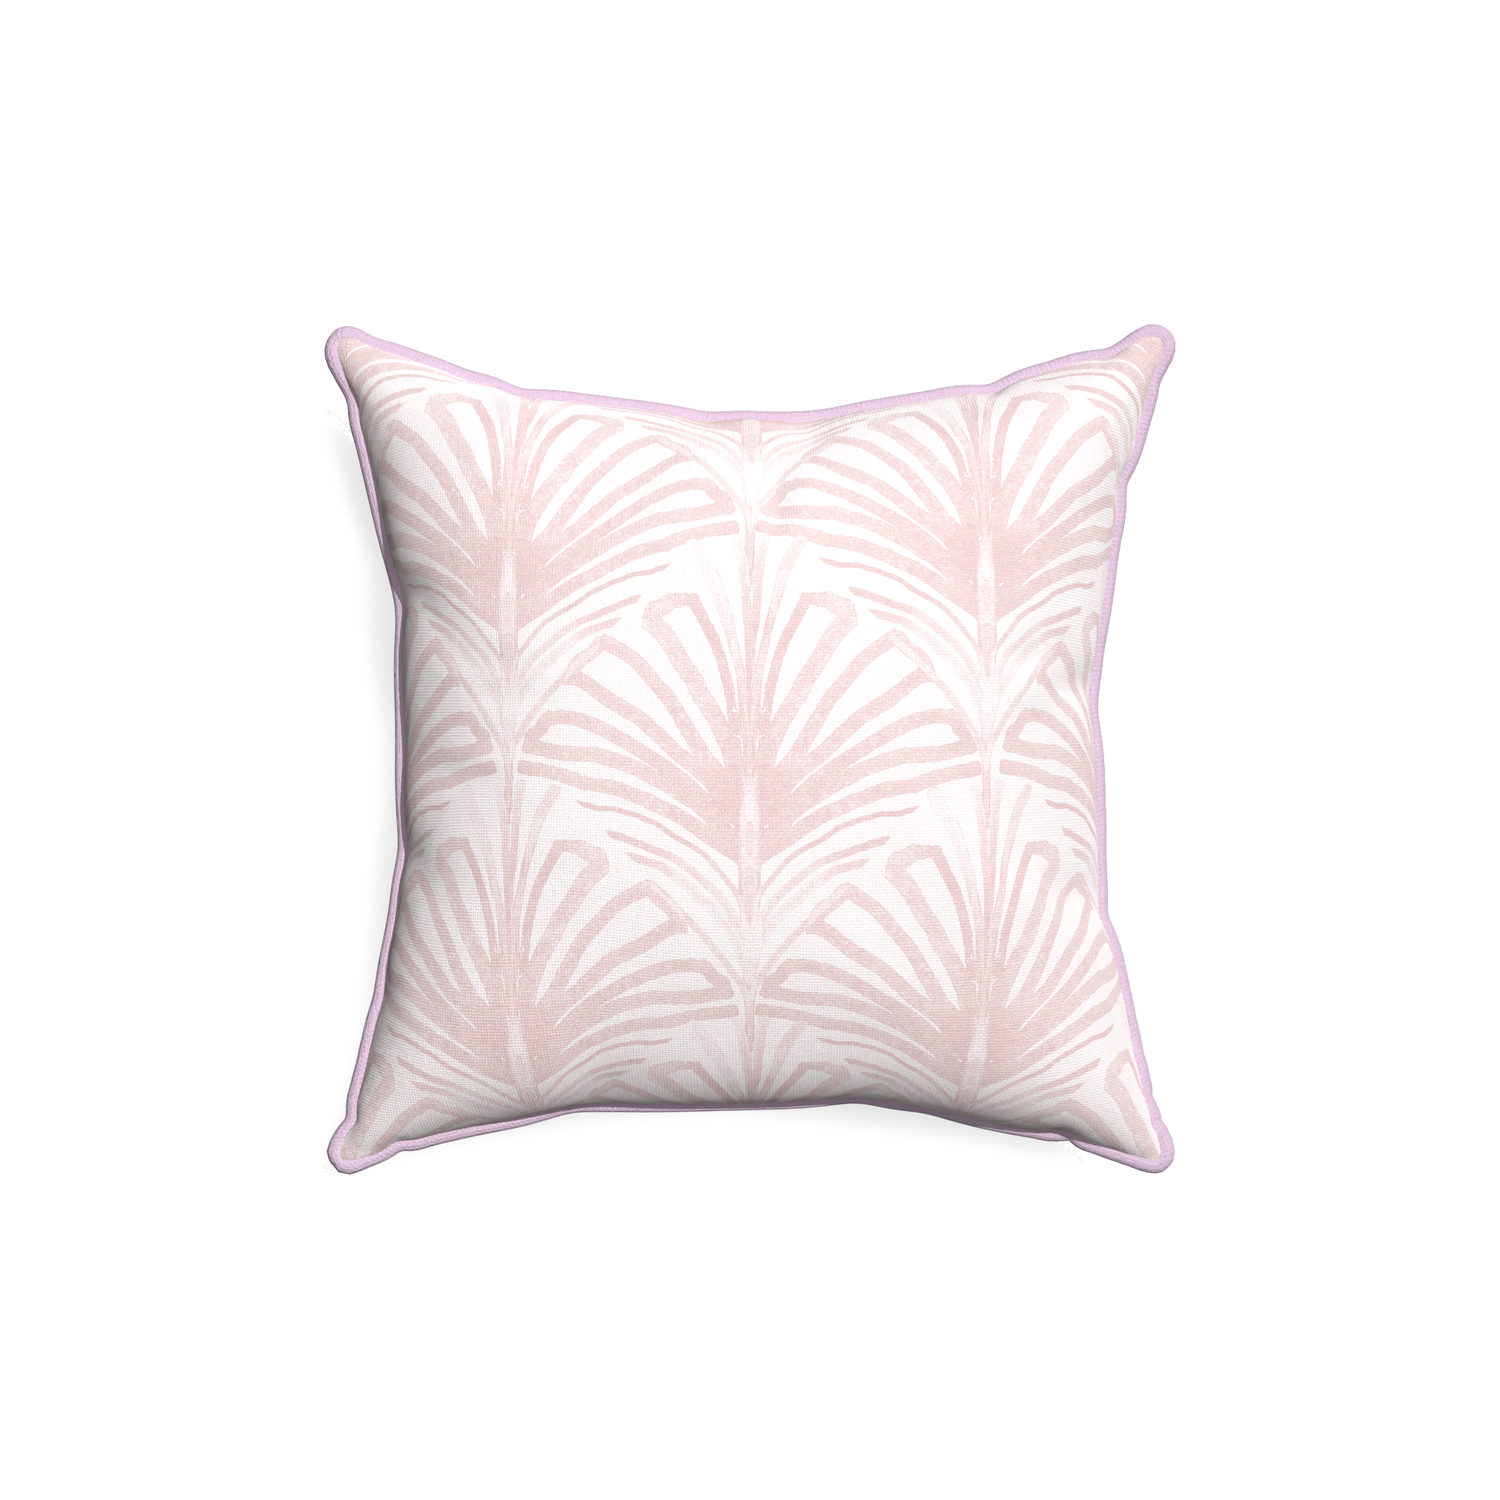 18-square suzy rose custom pillow with l piping on white background